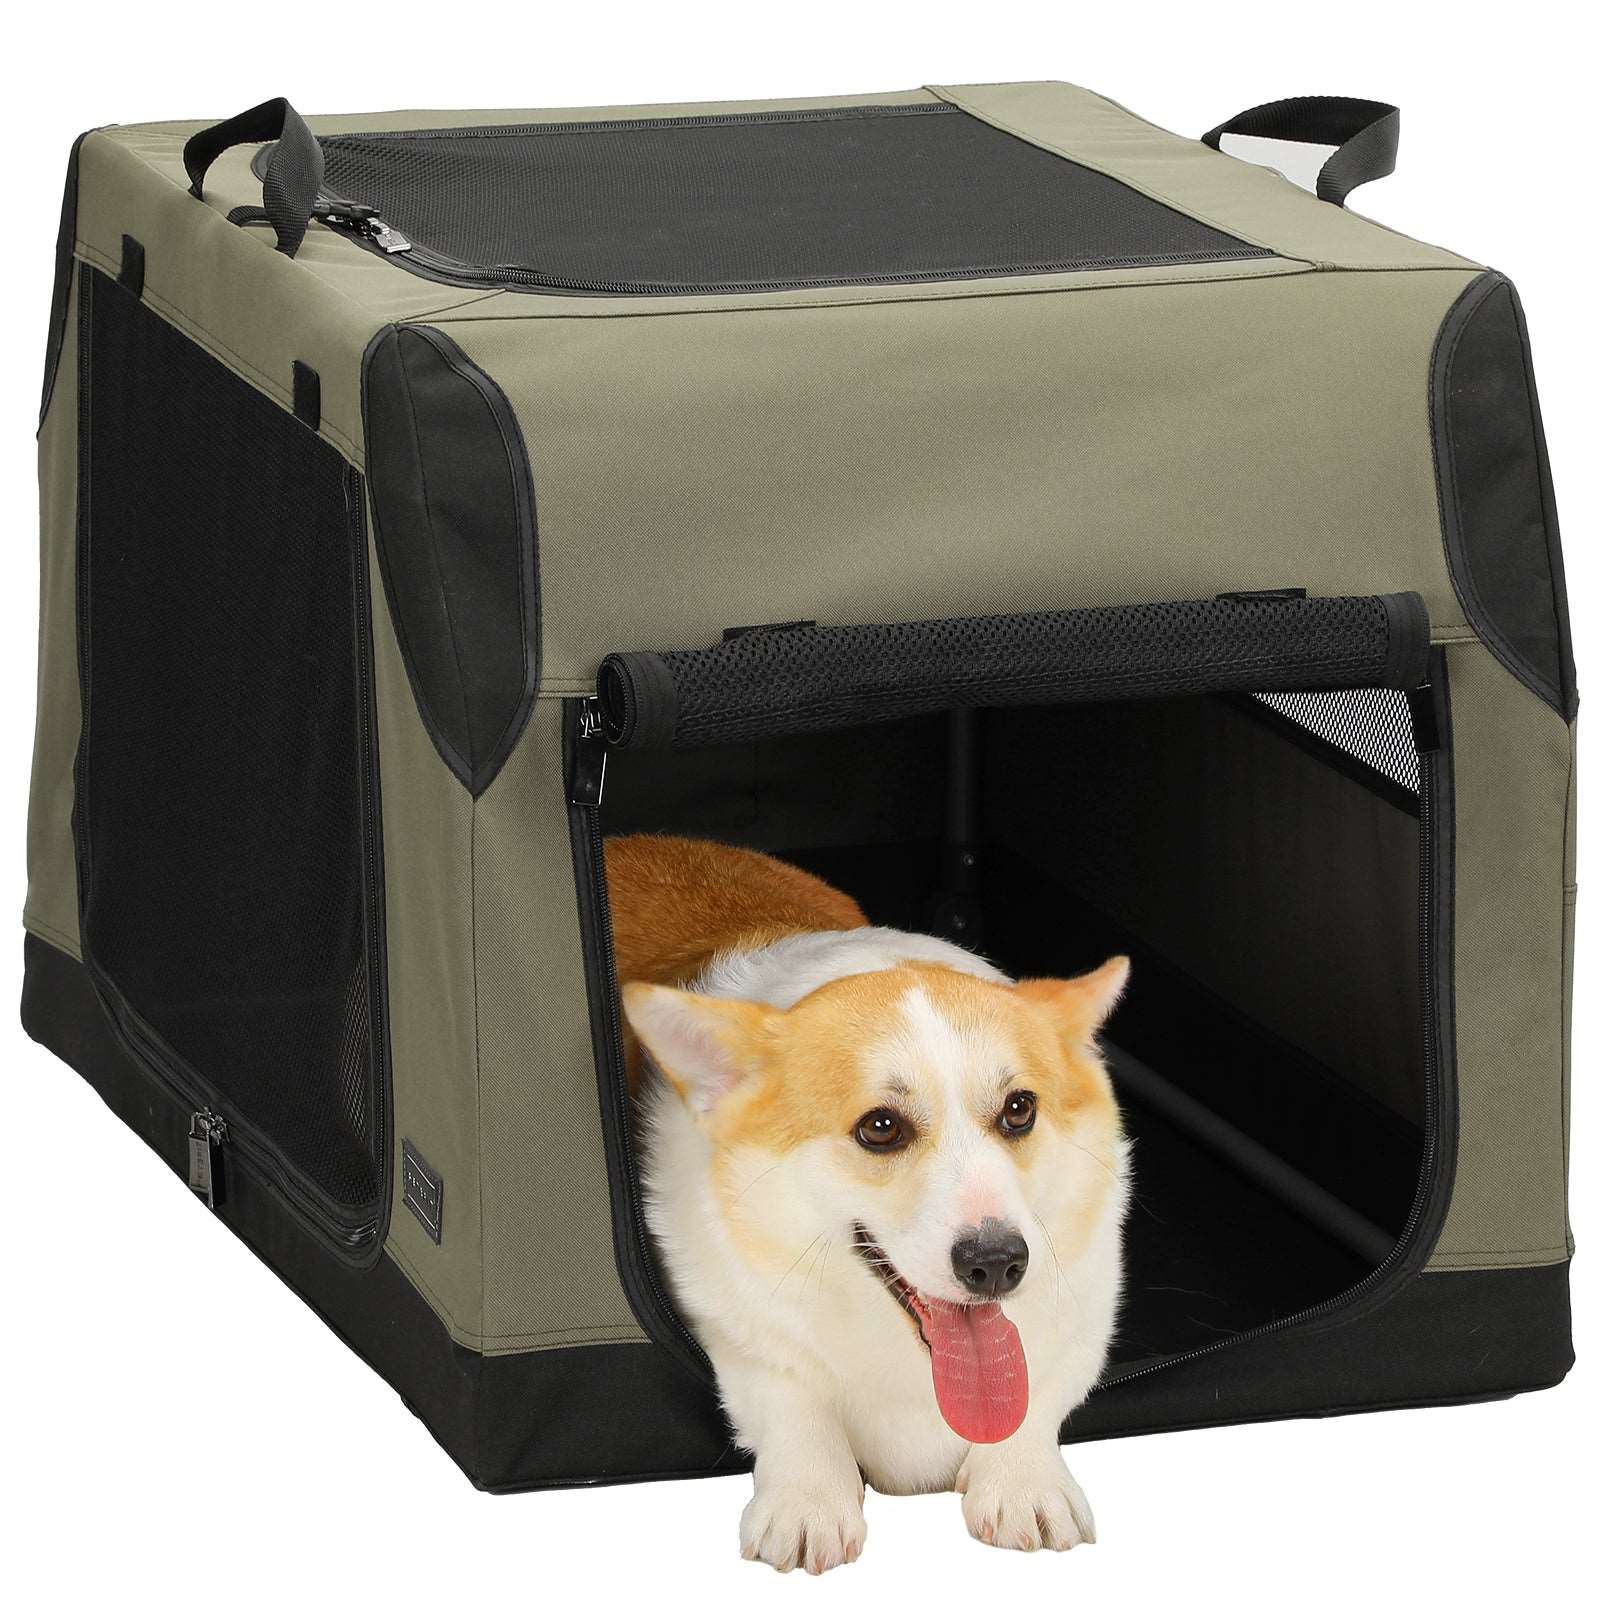 Petsfit-Soft-Sided-Portable-Travel-Kennel-for-Pet-01